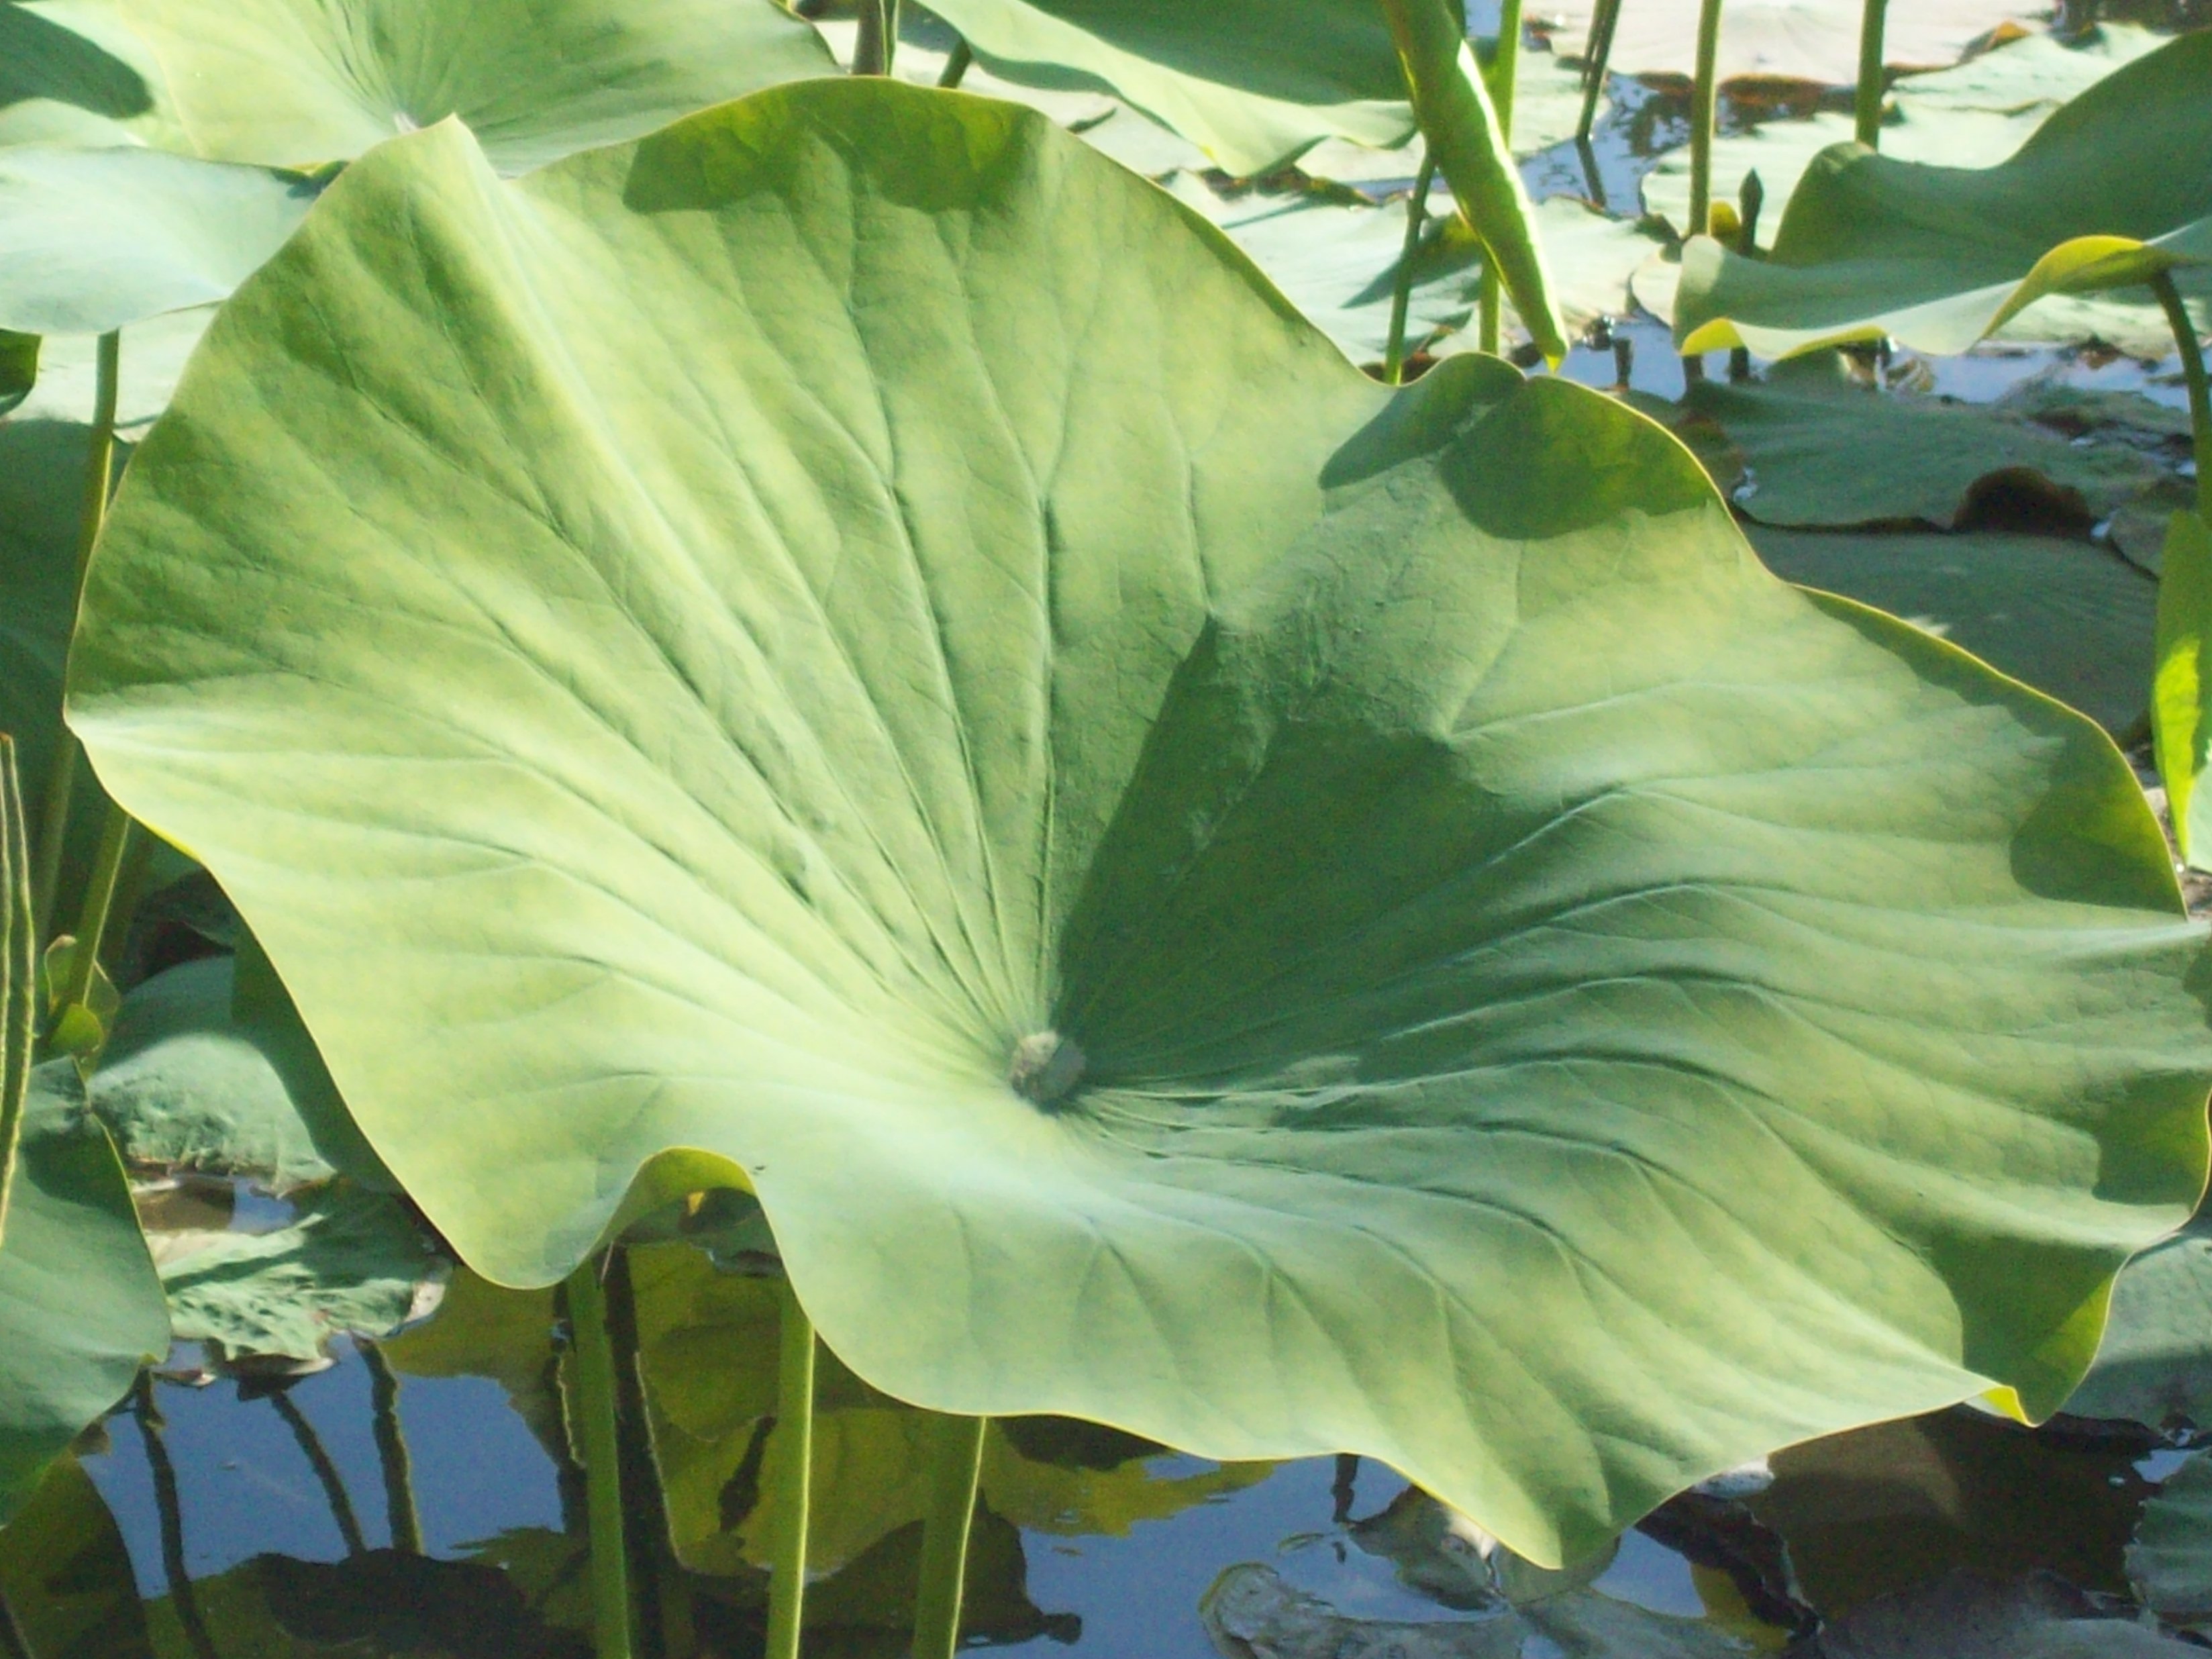 Free Download Lily Pad Leaf Wallpaper Forwallpapercom 3296x2472 Images, Photos, Reviews